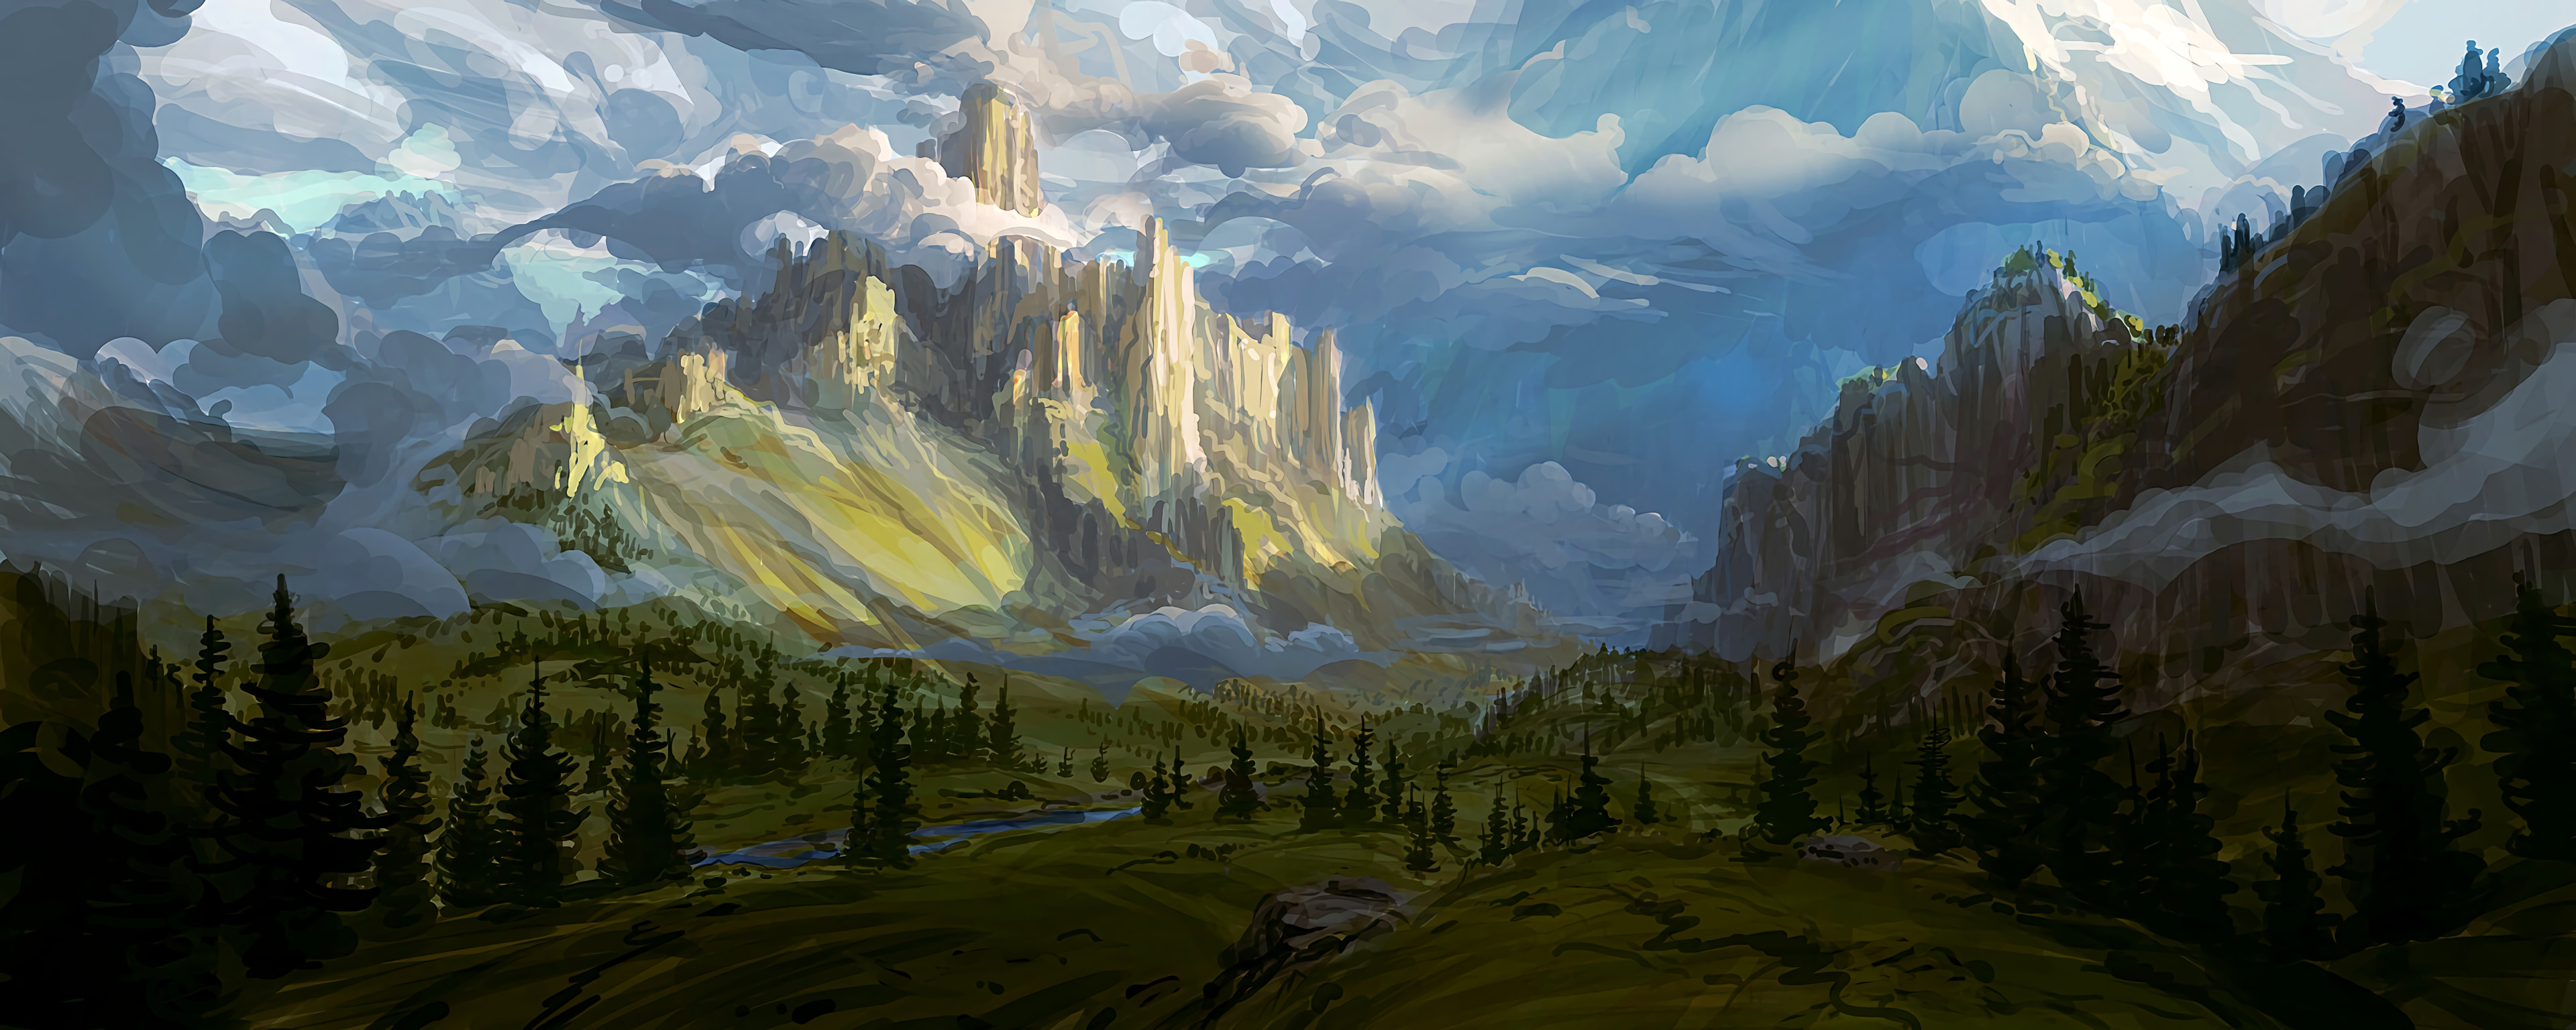 Landscape Mountains Valley Trees Grass Clouds 3840x1536